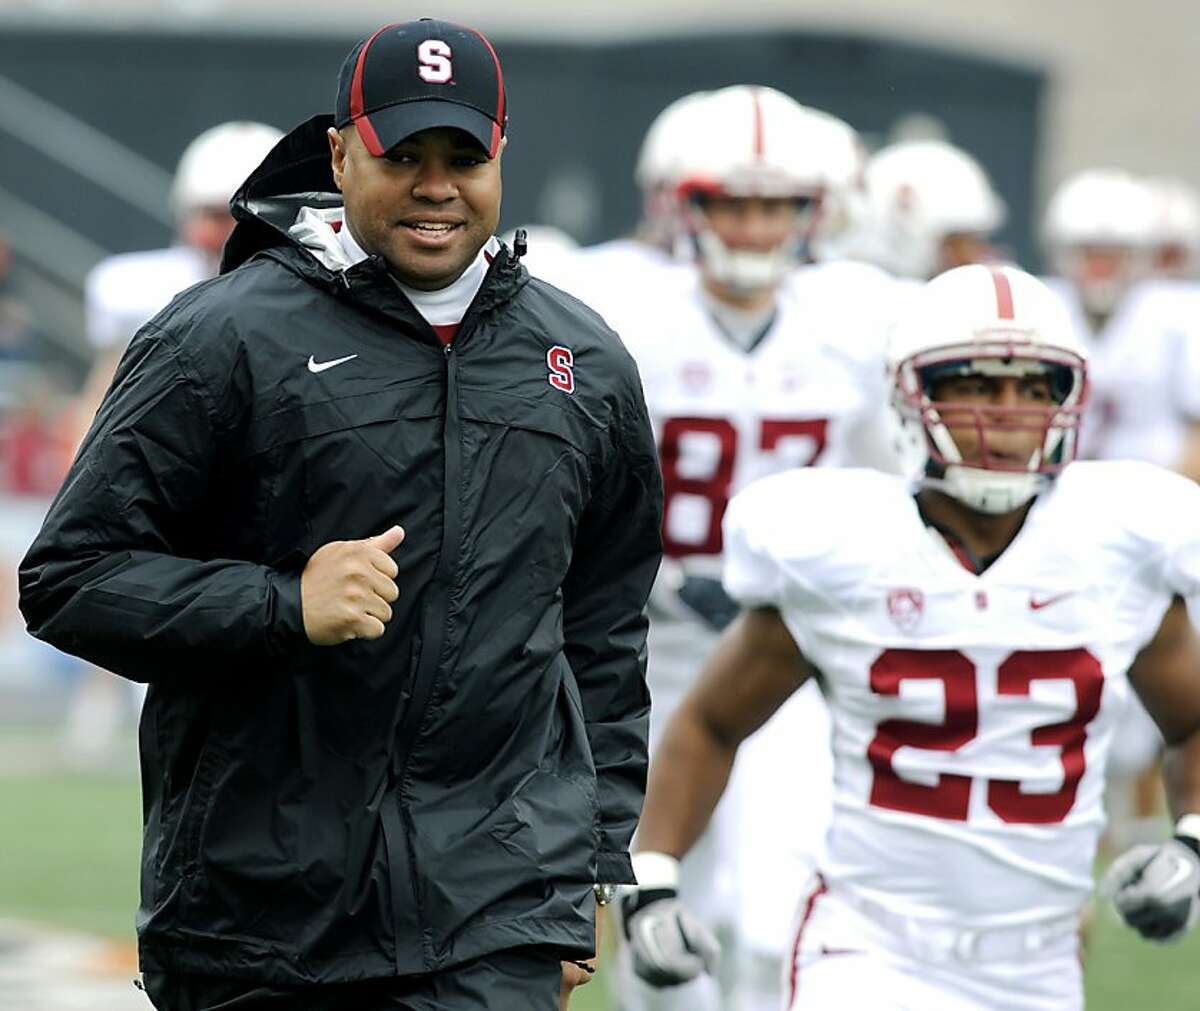 Stanford's head coach David Shaw, center, runs onto the field with his team before the first half of an NCAA football game against Oregon State in Corvallis, Ore., Saturday, Nov. 5, 2011.